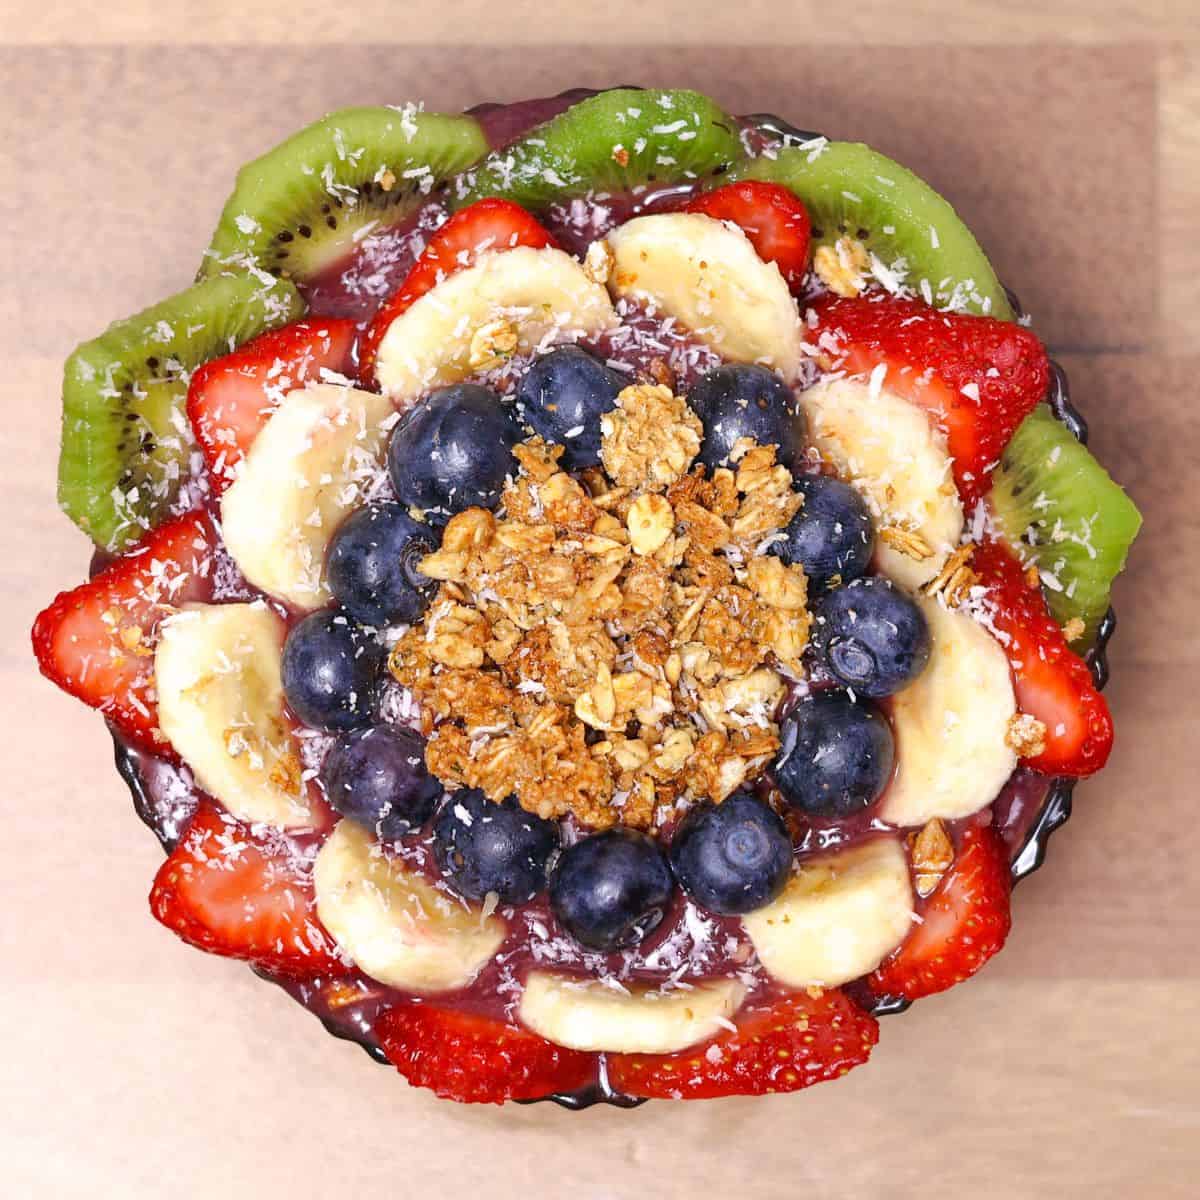 A finished Hawaiian açaí bowl with a colorful arrangement of banana, kiwi, strawberries, and blueber